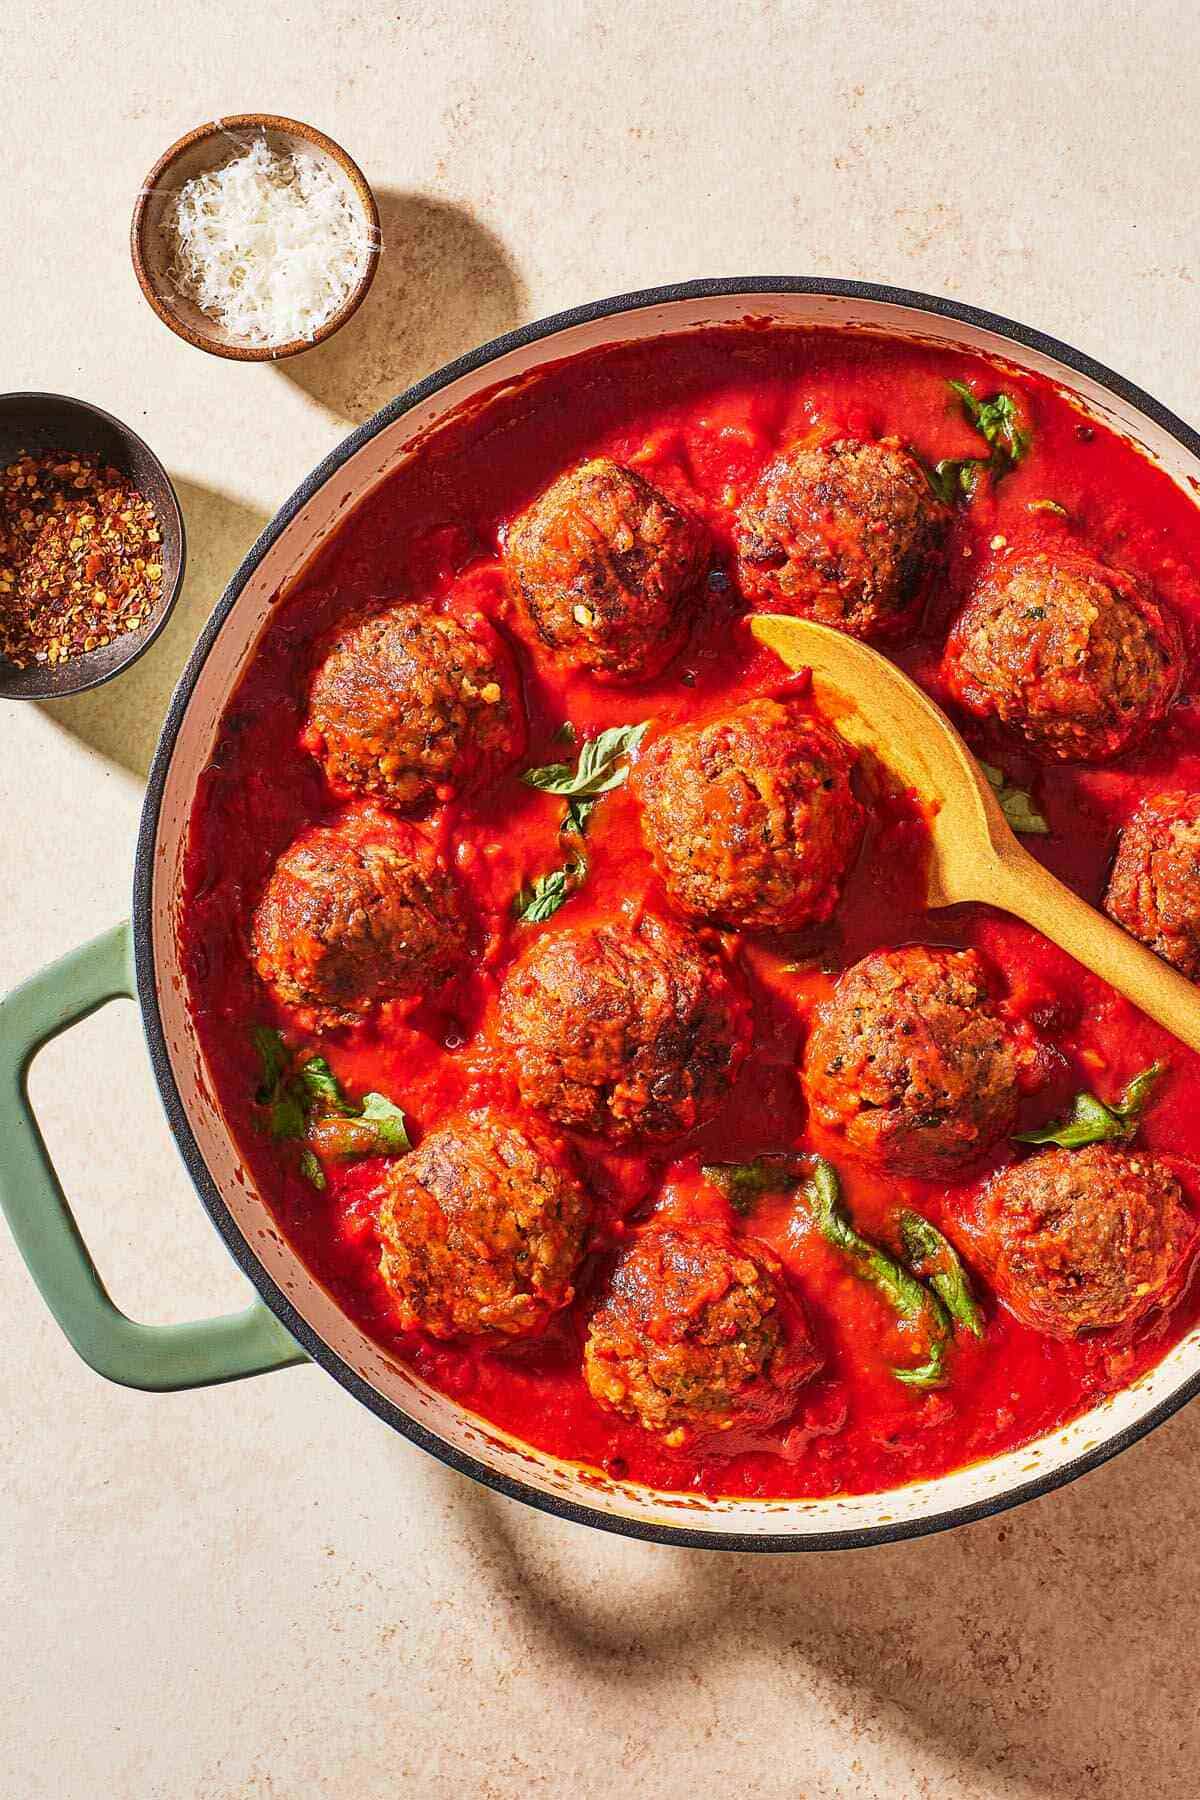 meatballs in sauce in a large pot with a wooden spoon next to small bowls of red pepper flakes and grated parmesan cheese.